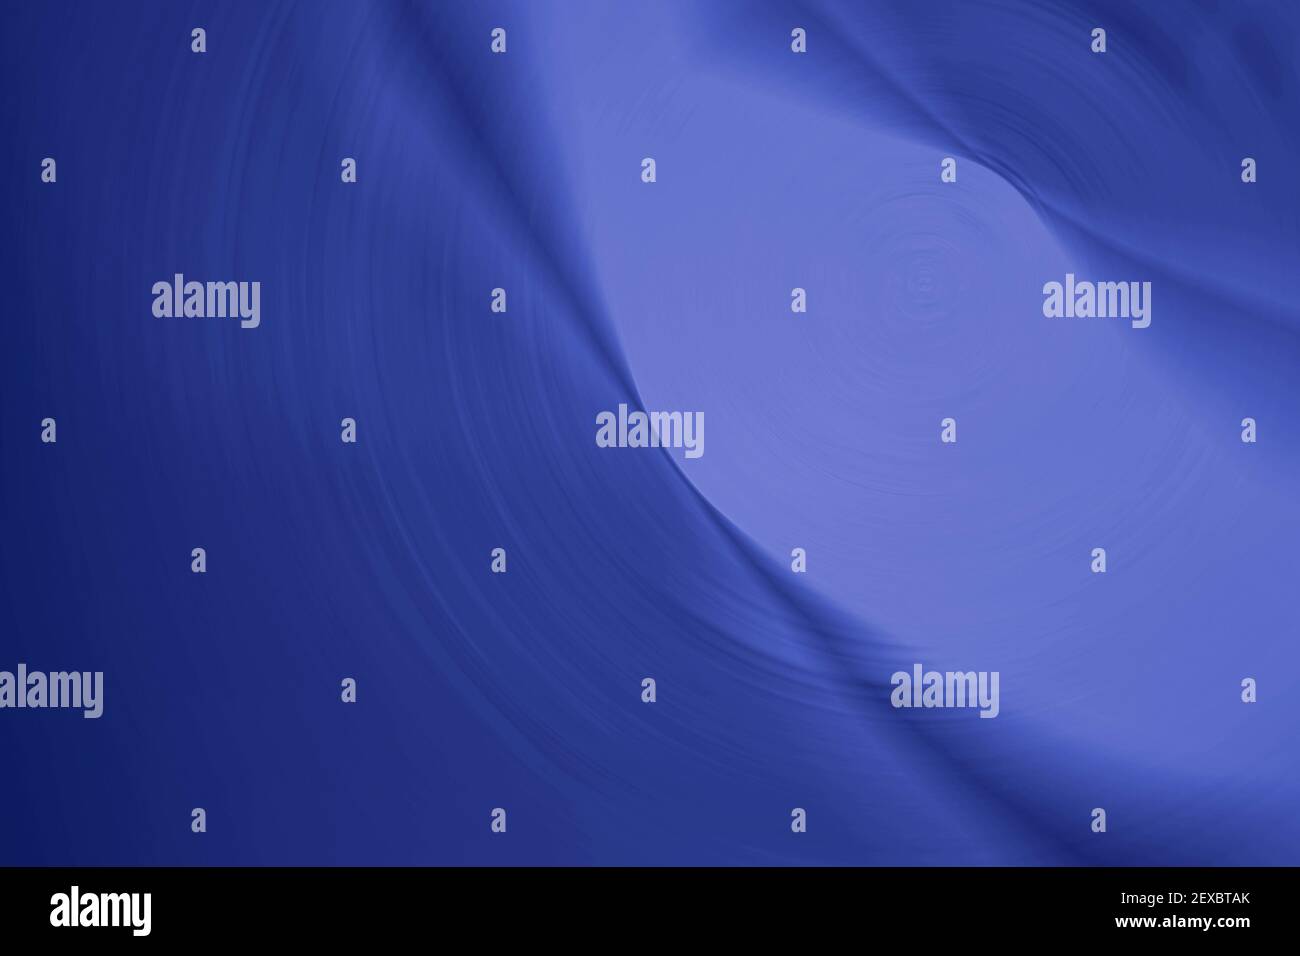 Blue background graphic Stock Photo